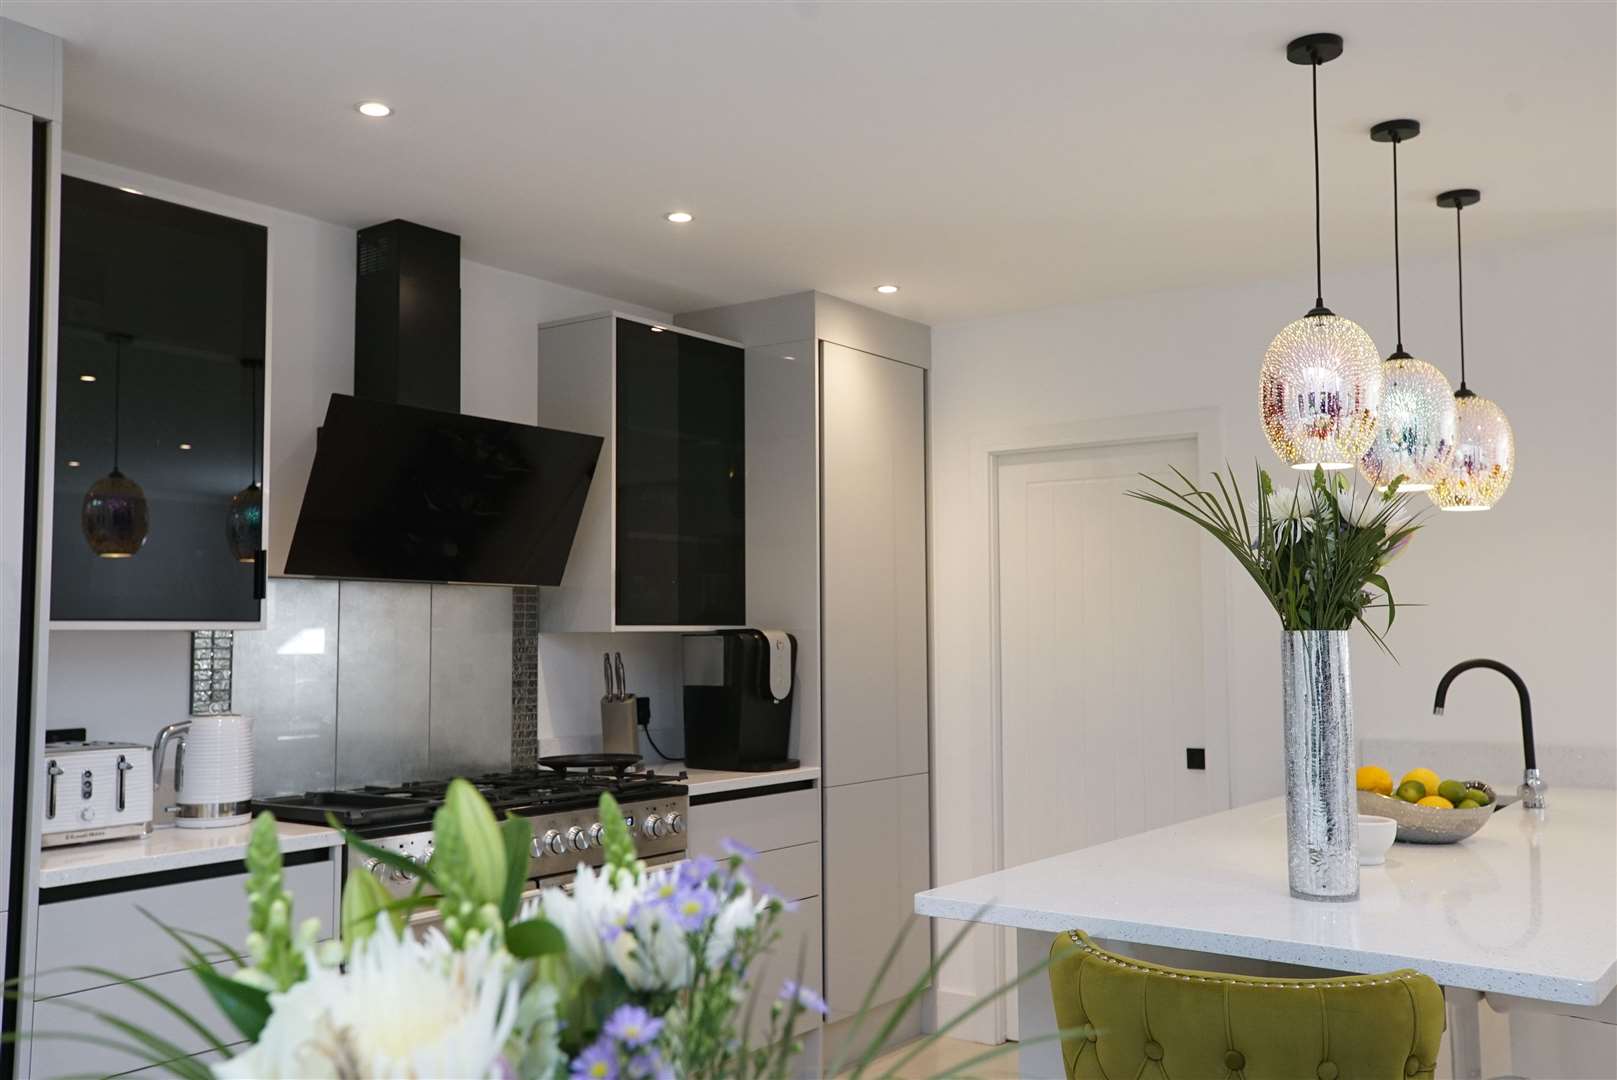 Entertaining space was a key part of Steven and Shelley's brief and they fell in love with Julian's design for their home. Picture: BBC/Remarkable TV